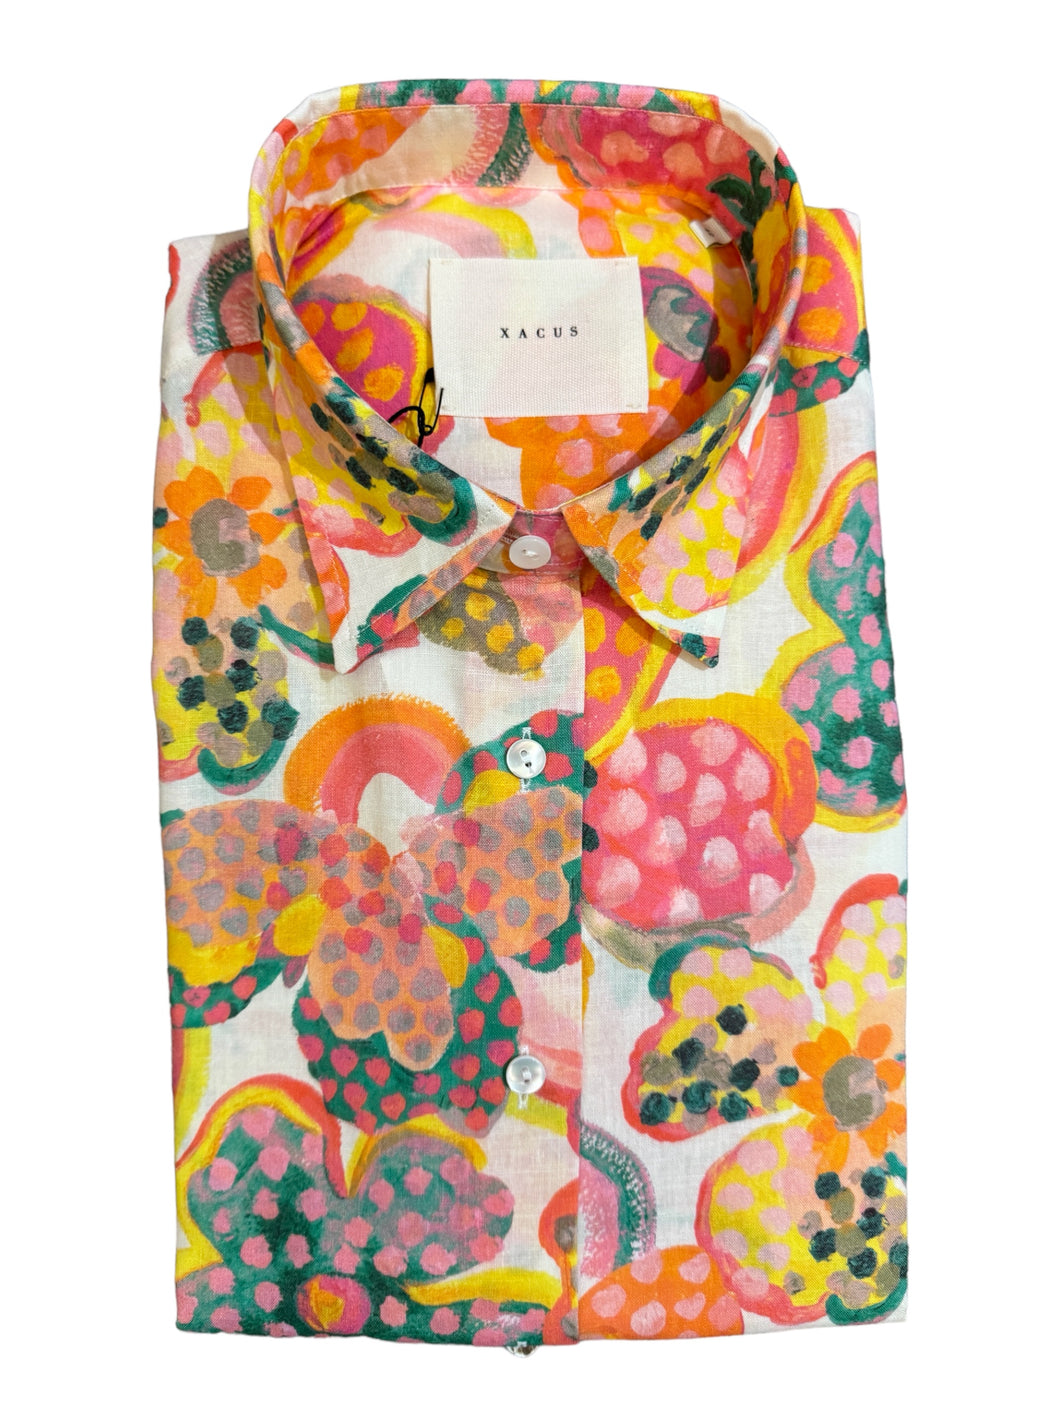 Xacus Women's Shirt - Coral Abstract Floral